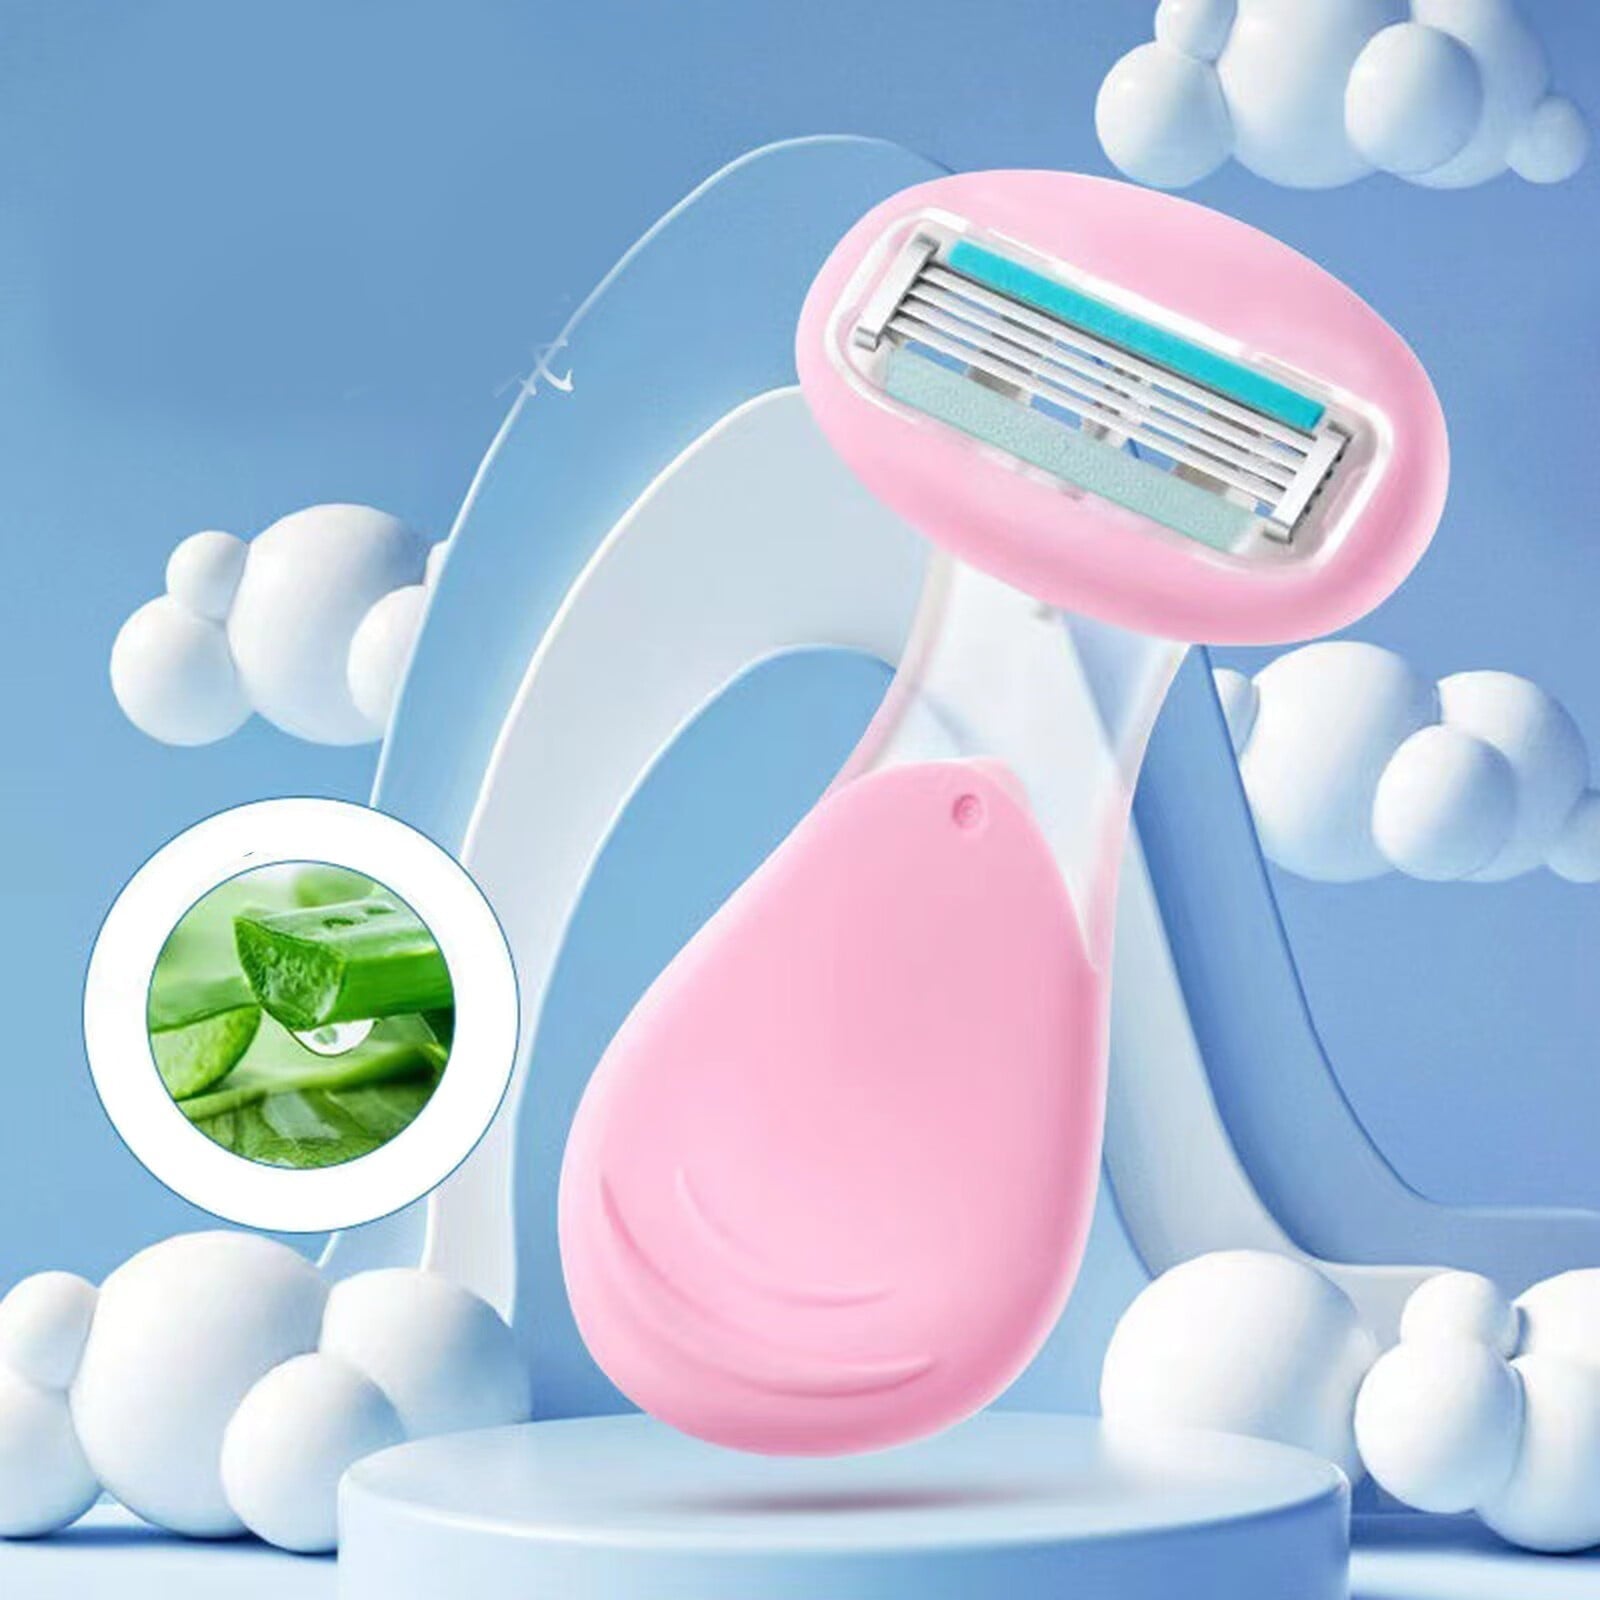 Wholesale prices with free shipping all over United States Randolph 4 Lady Safty Mini Face Shaving With PP Box Gift For Women Men Women Personal Care Triple ABS+TPR - Steven Deals